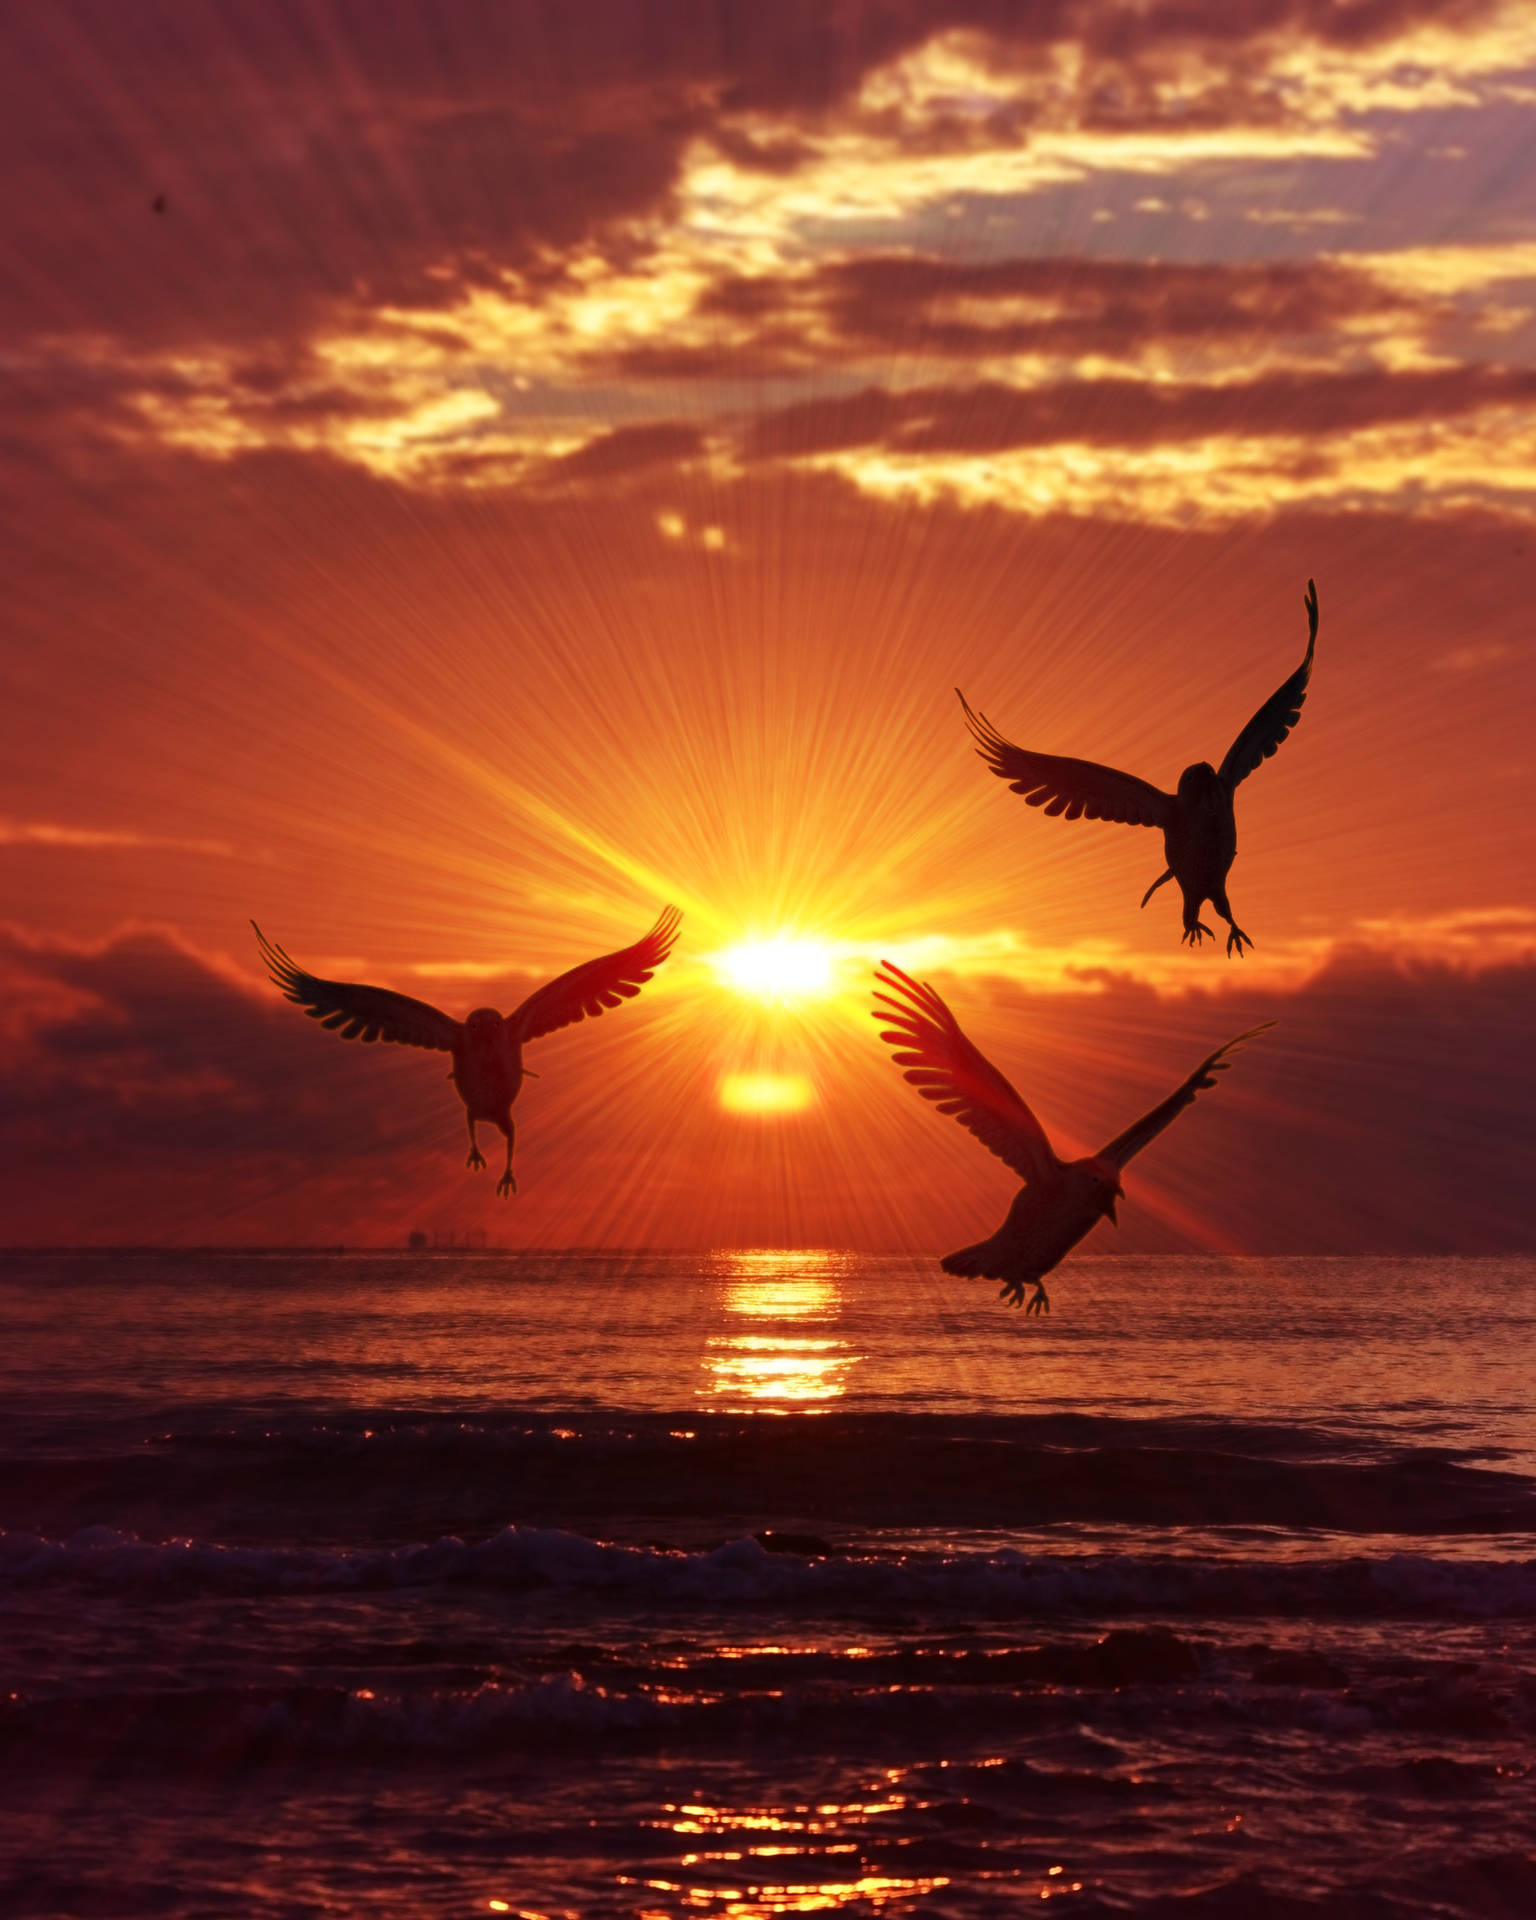 Watch the beautiful sunrise with the silhouetted birds flying against the magnificent sky. Wallpaper